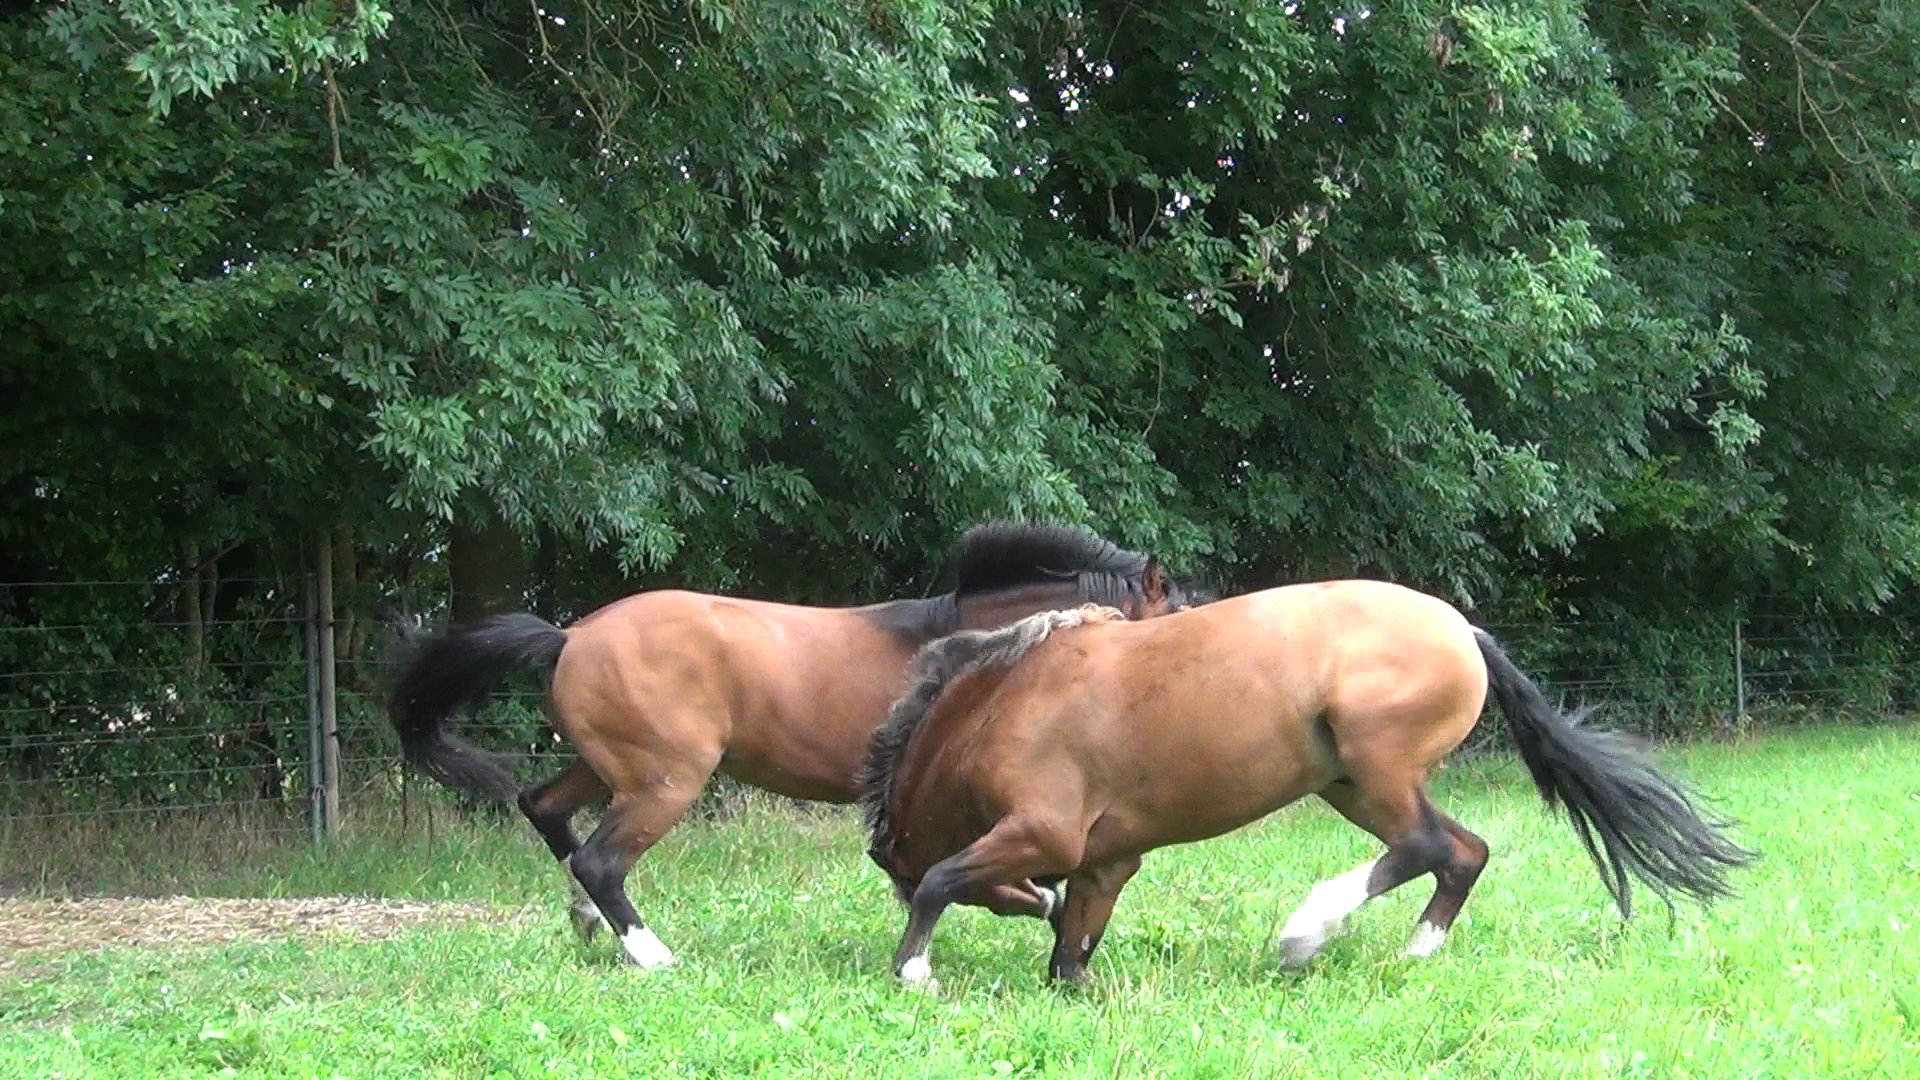 Documentary THE FREEDOM OF THE HEART.Two Swiss French Mountain stallions of the Swiss National Stud fighting for their rank within the stallion herd.